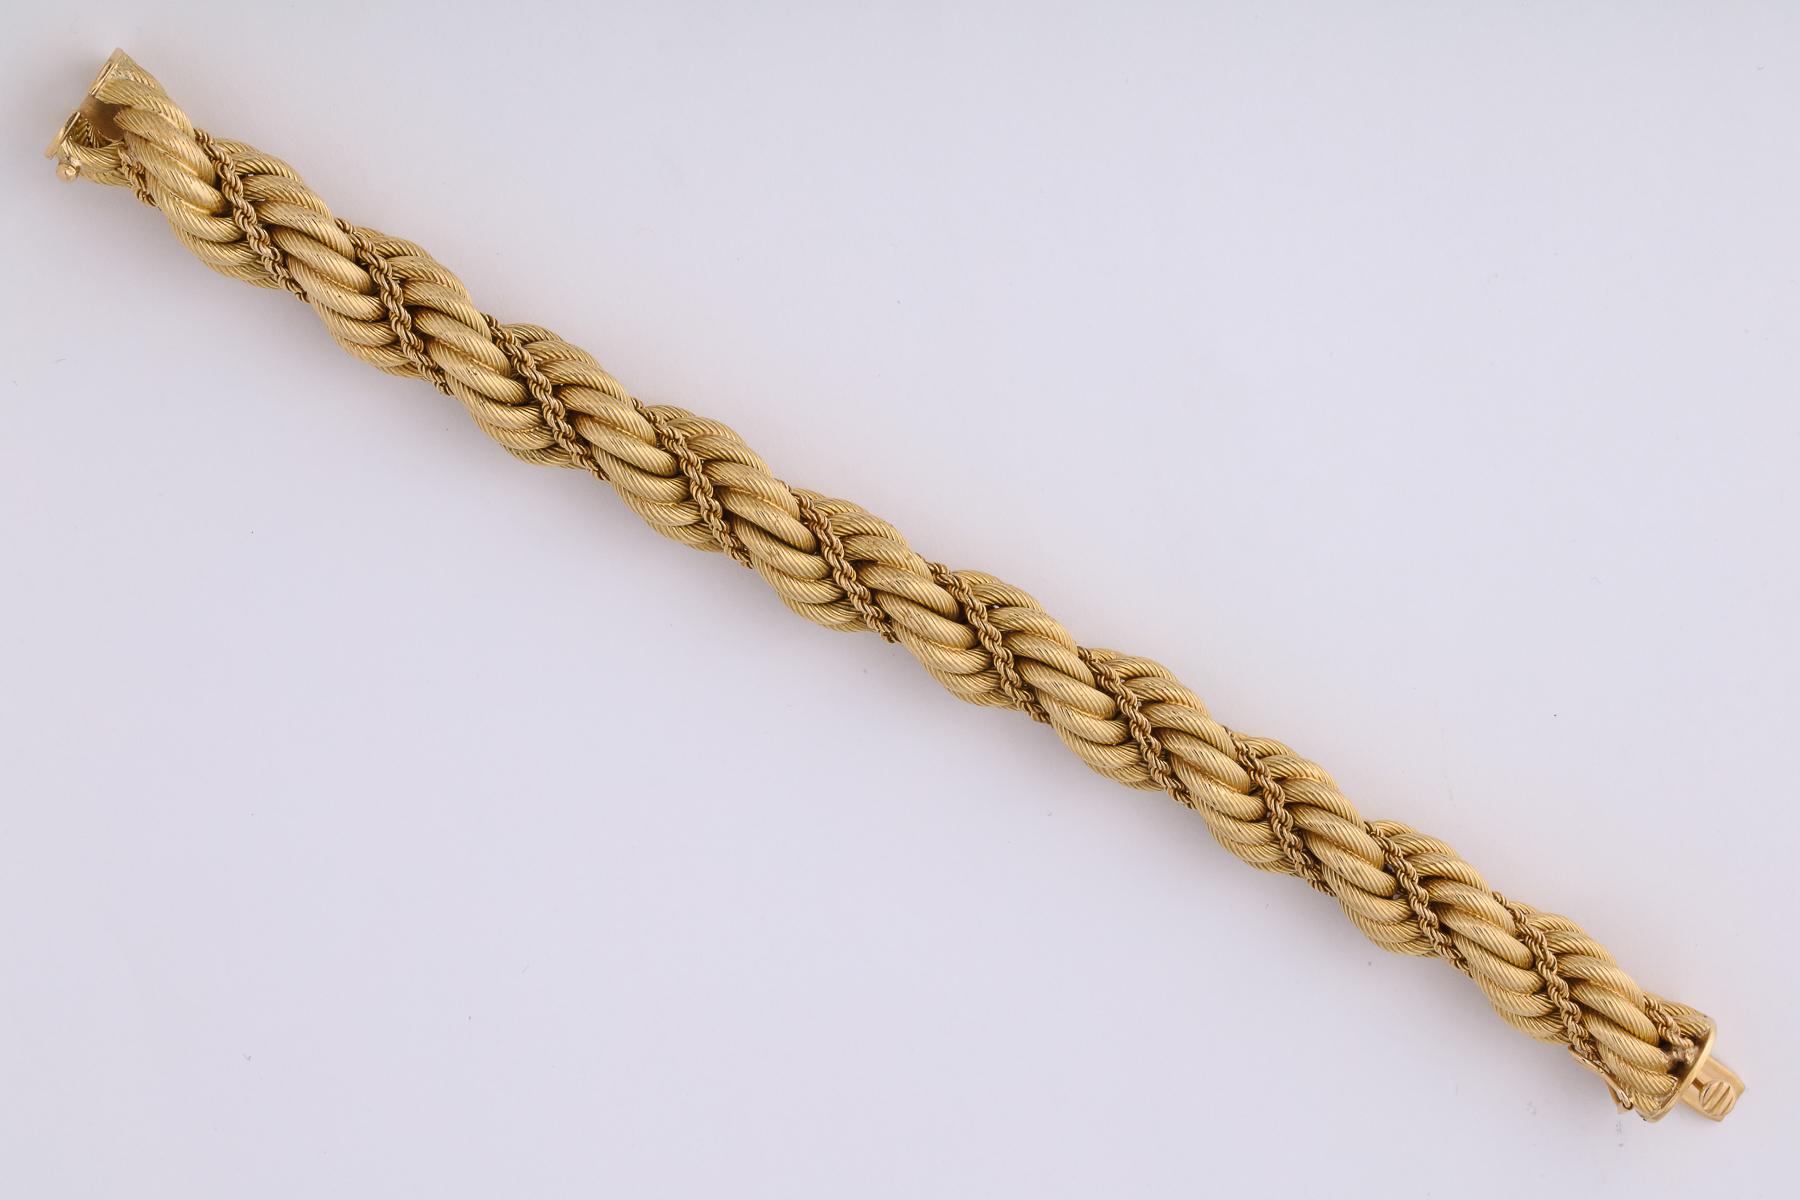 One Ladies 18kt Gold Twist Bracelet Designed In A Textured  Ridged Gold Link With A 18kt Gold Rope Thruout The Design Of Bracelet. Created In 1969 In Italy. Signed Tiffany & Co. Dated 1969 Stamped 18kt